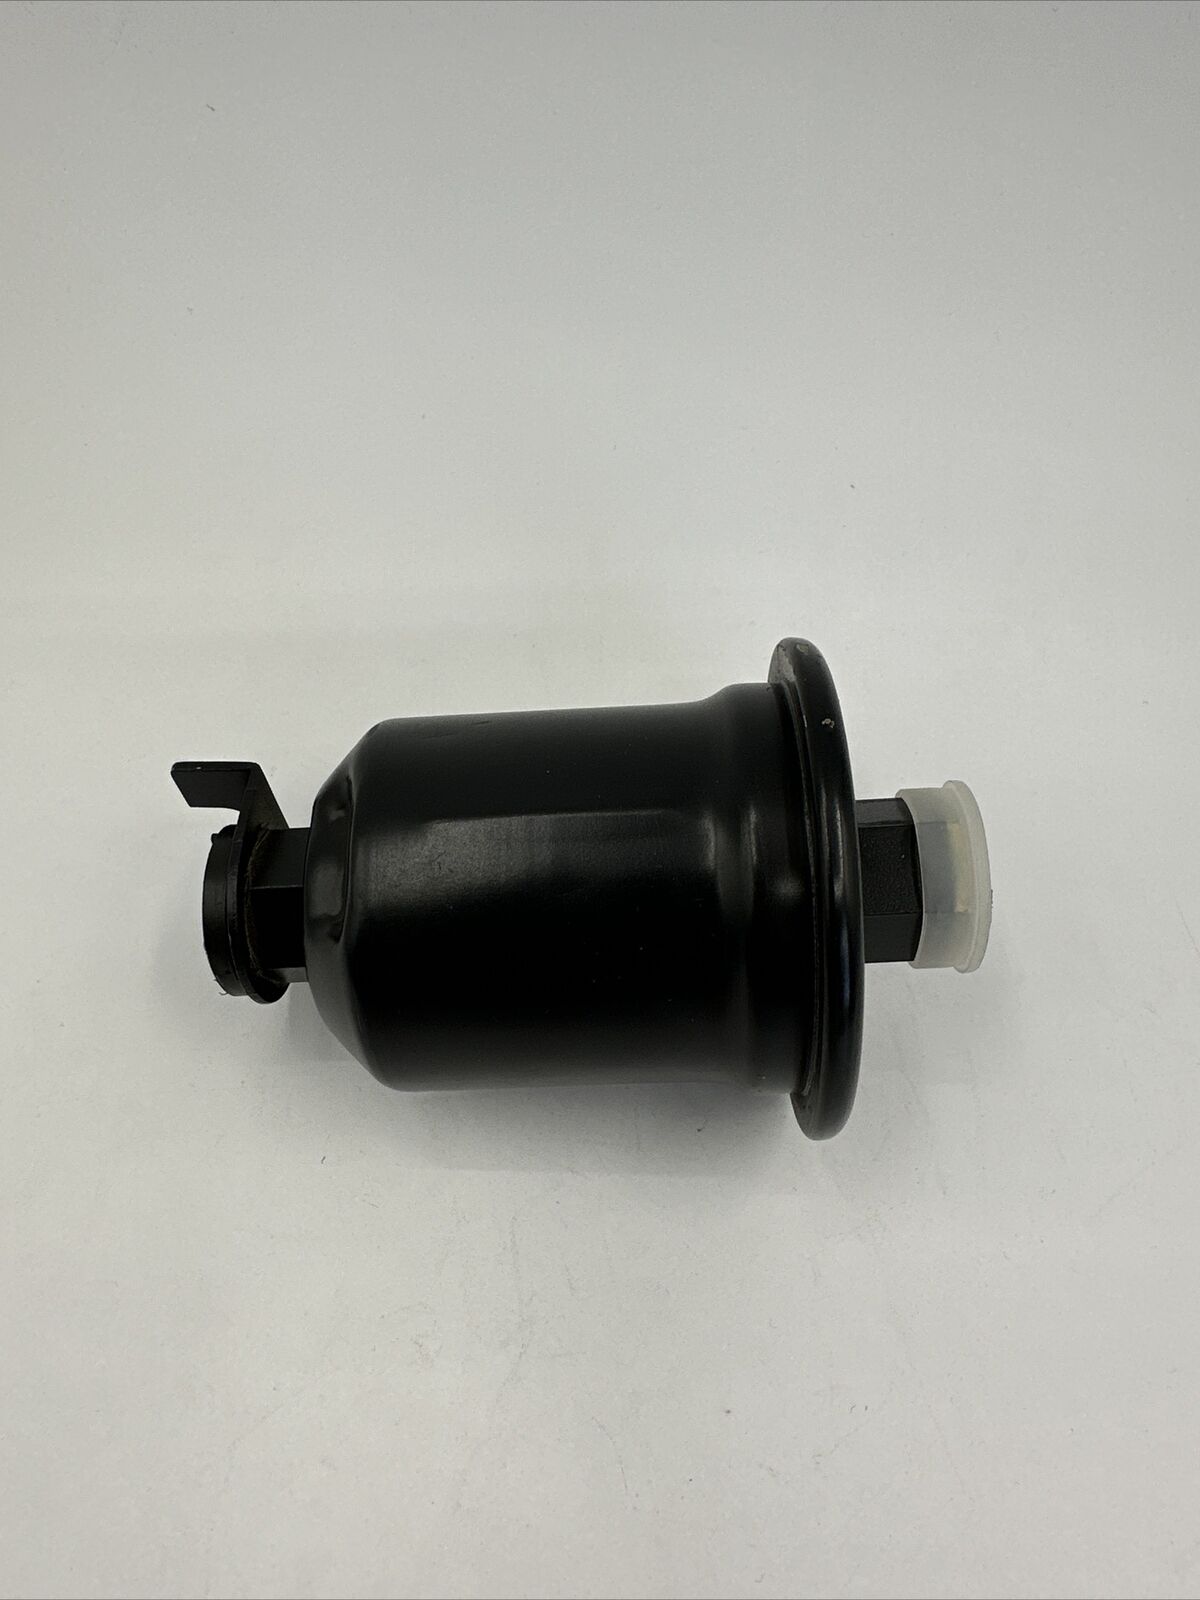 NOS Wix 33561 Fuel Filter Fits TOYOTA CELICA 1994-1999, Free Shipping!